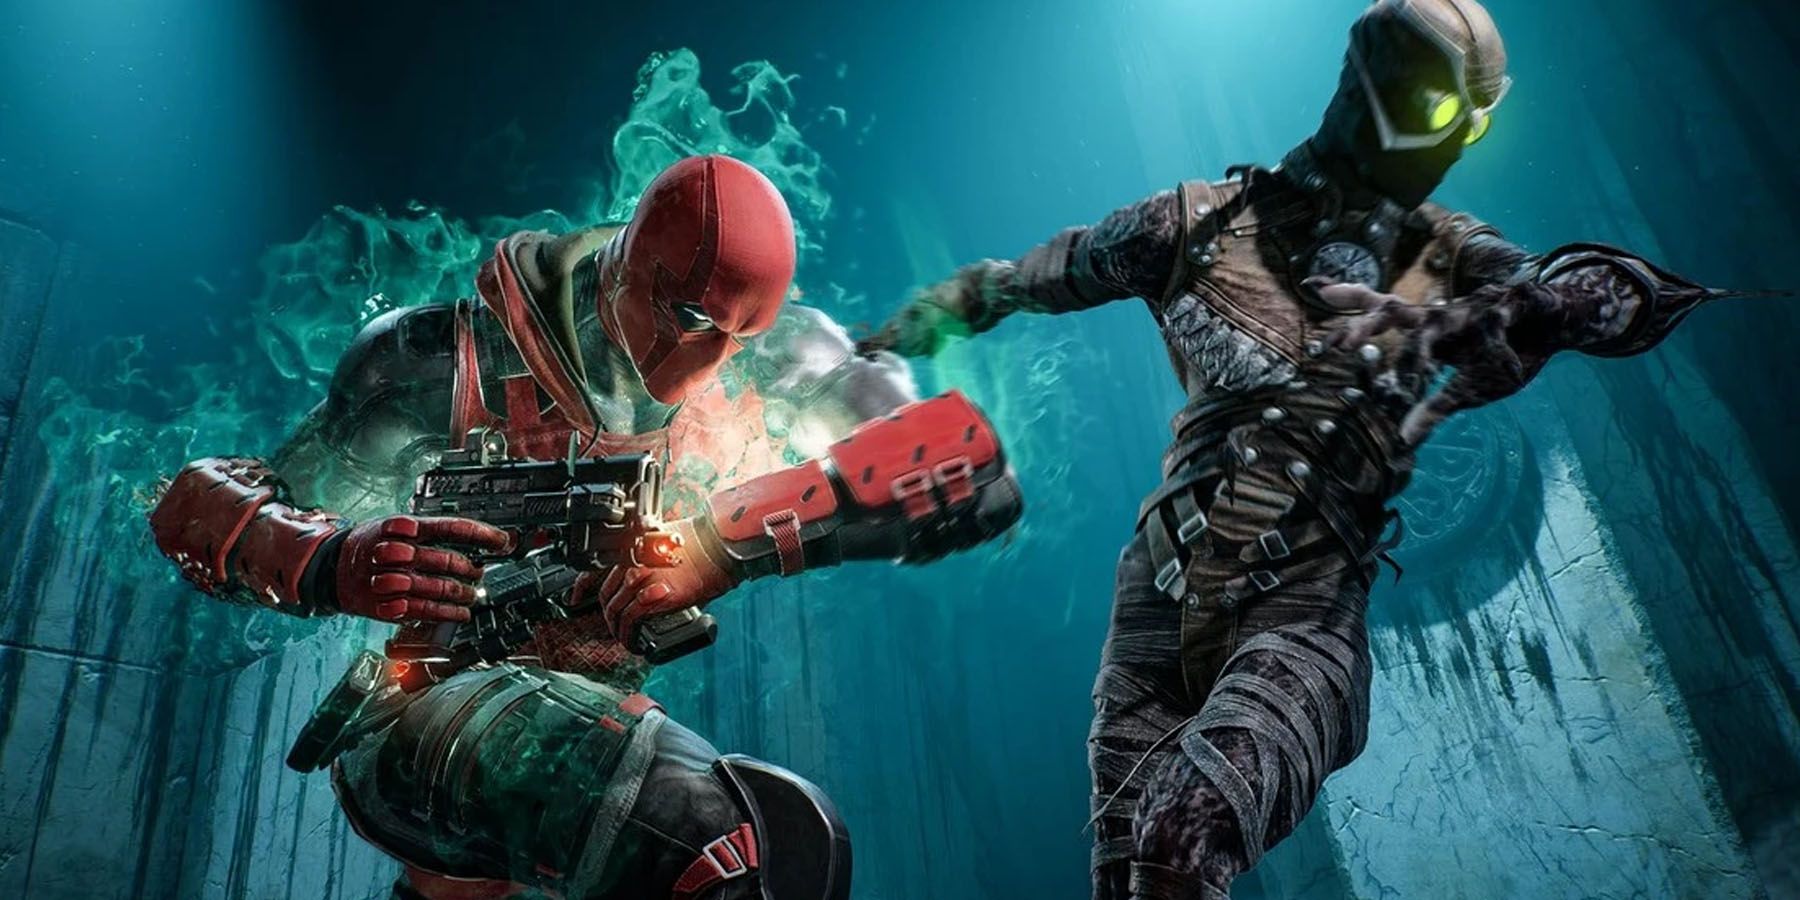 Red Hood attacking an opponent